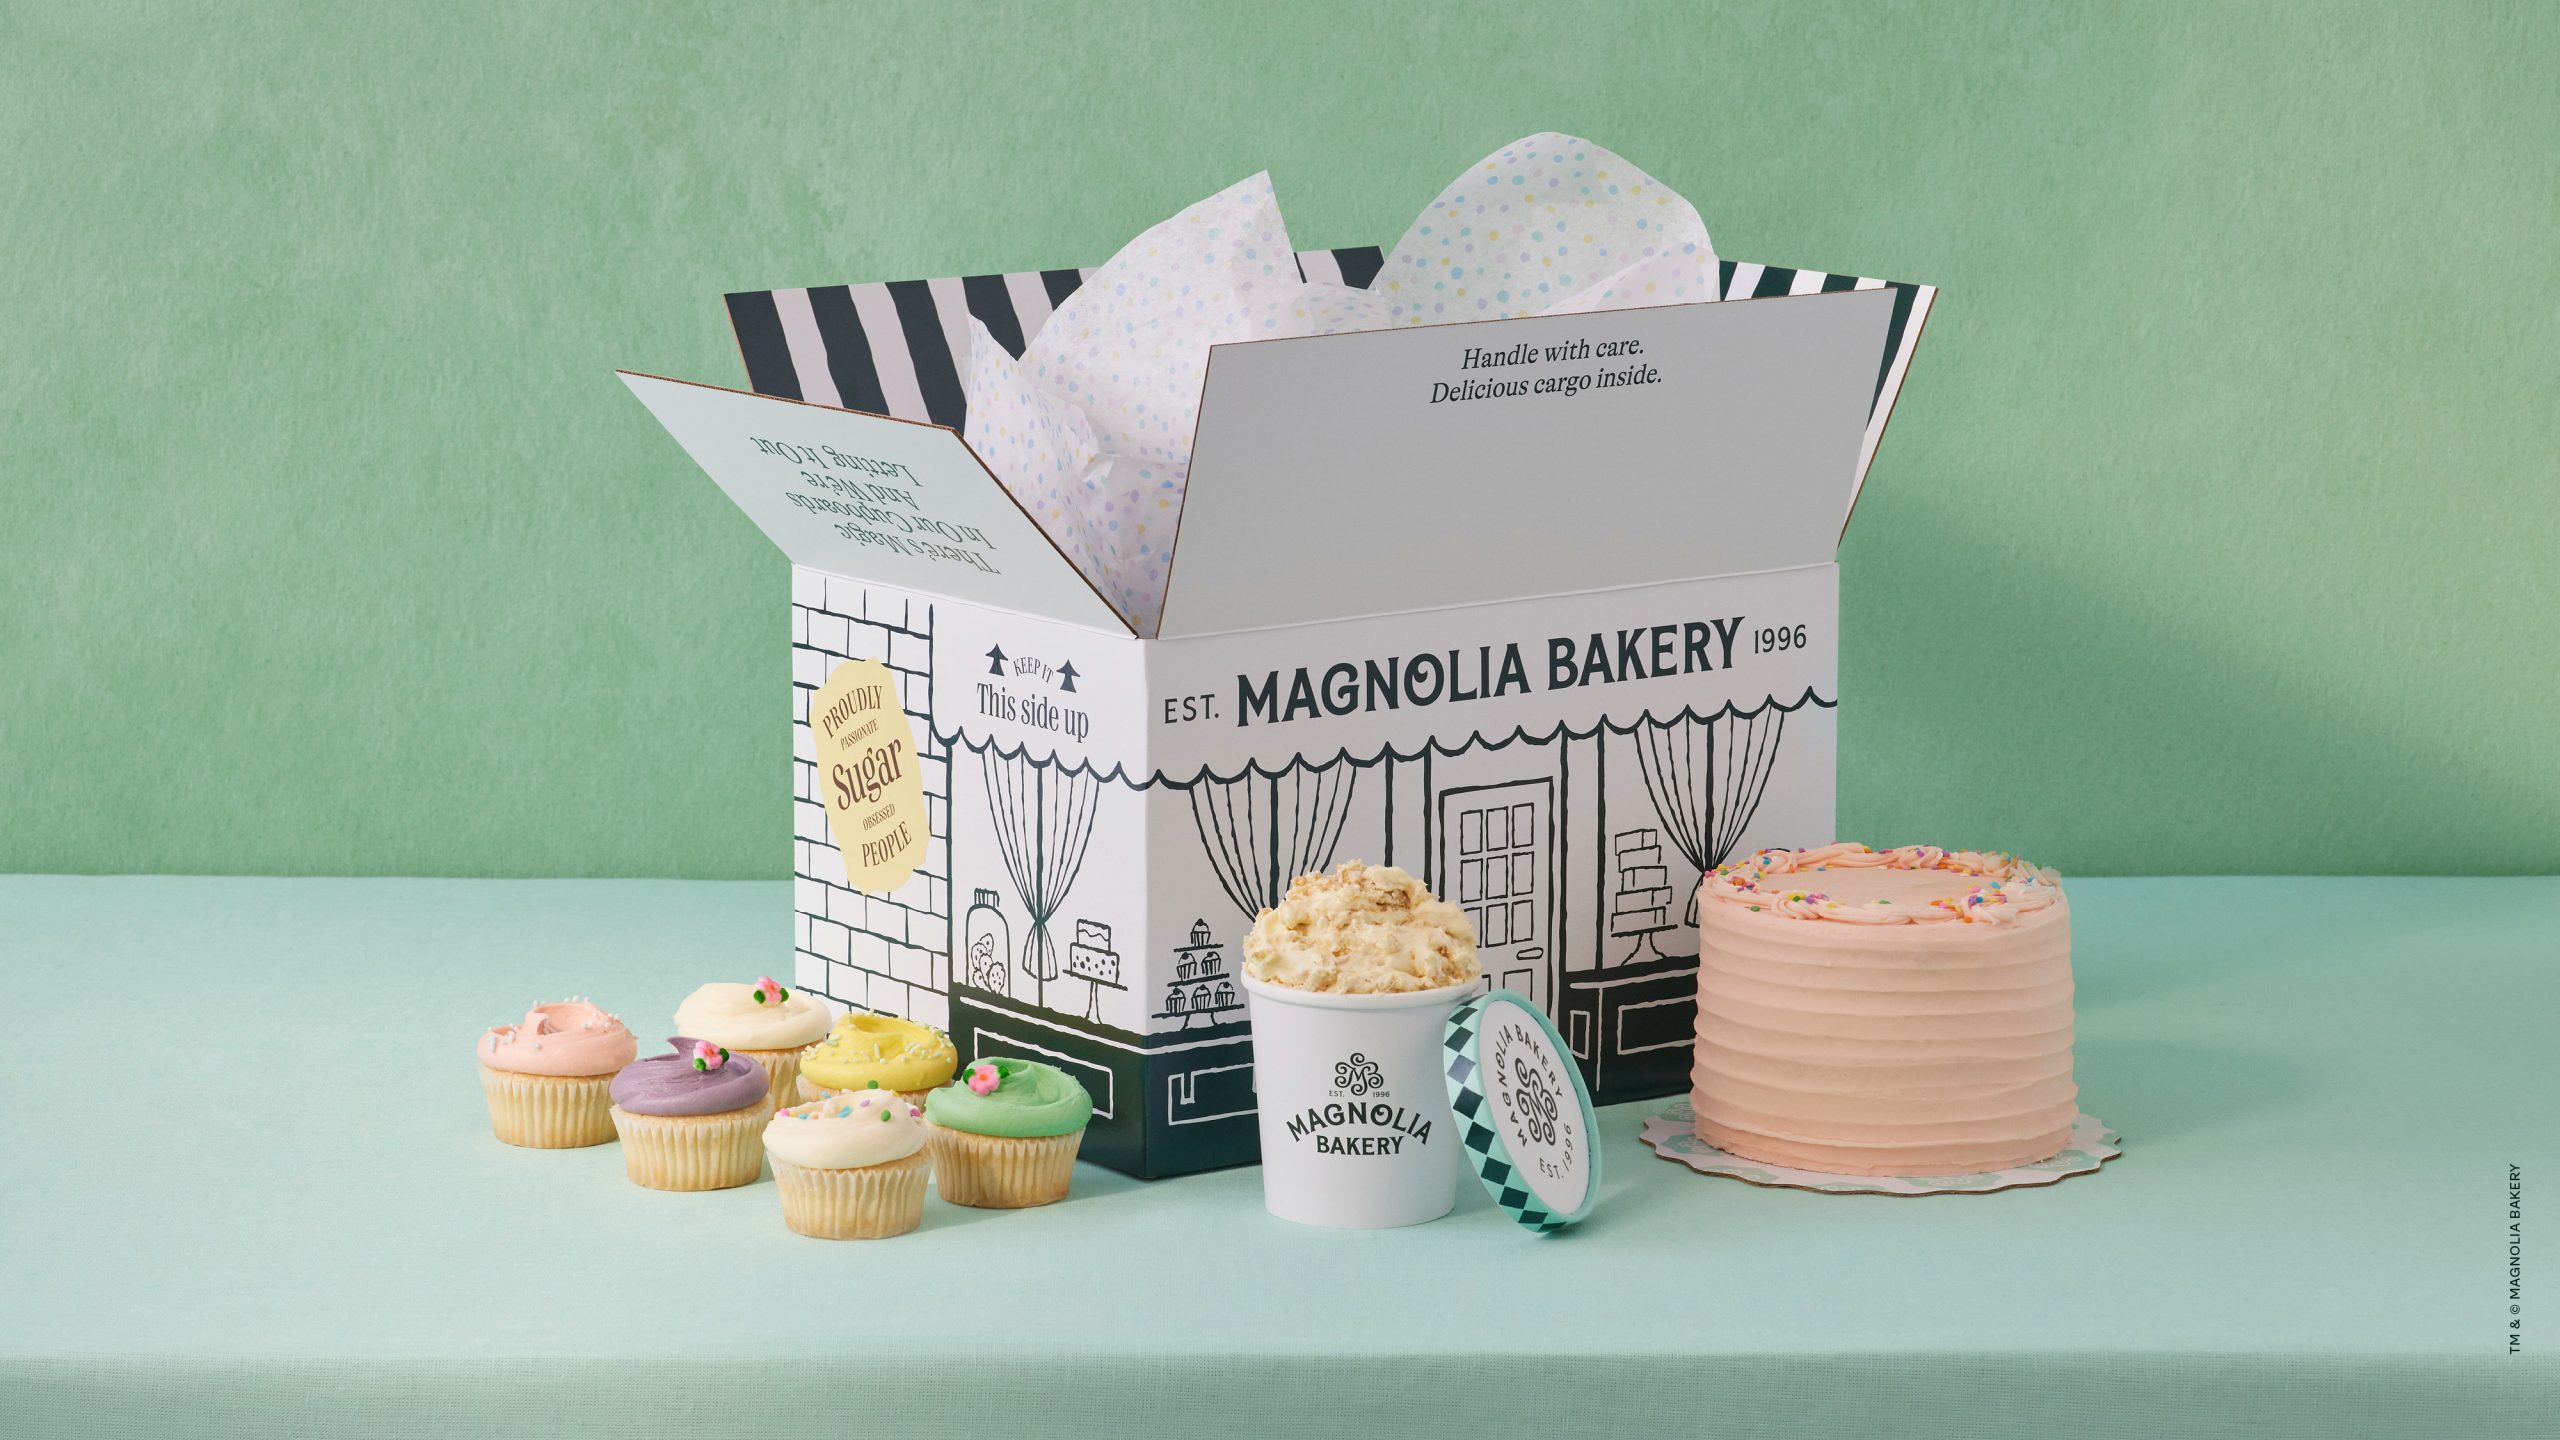 DIELINE: JKR Gives Magnolia Bakery Some Much-Needed Whimsy With New Brand Identity